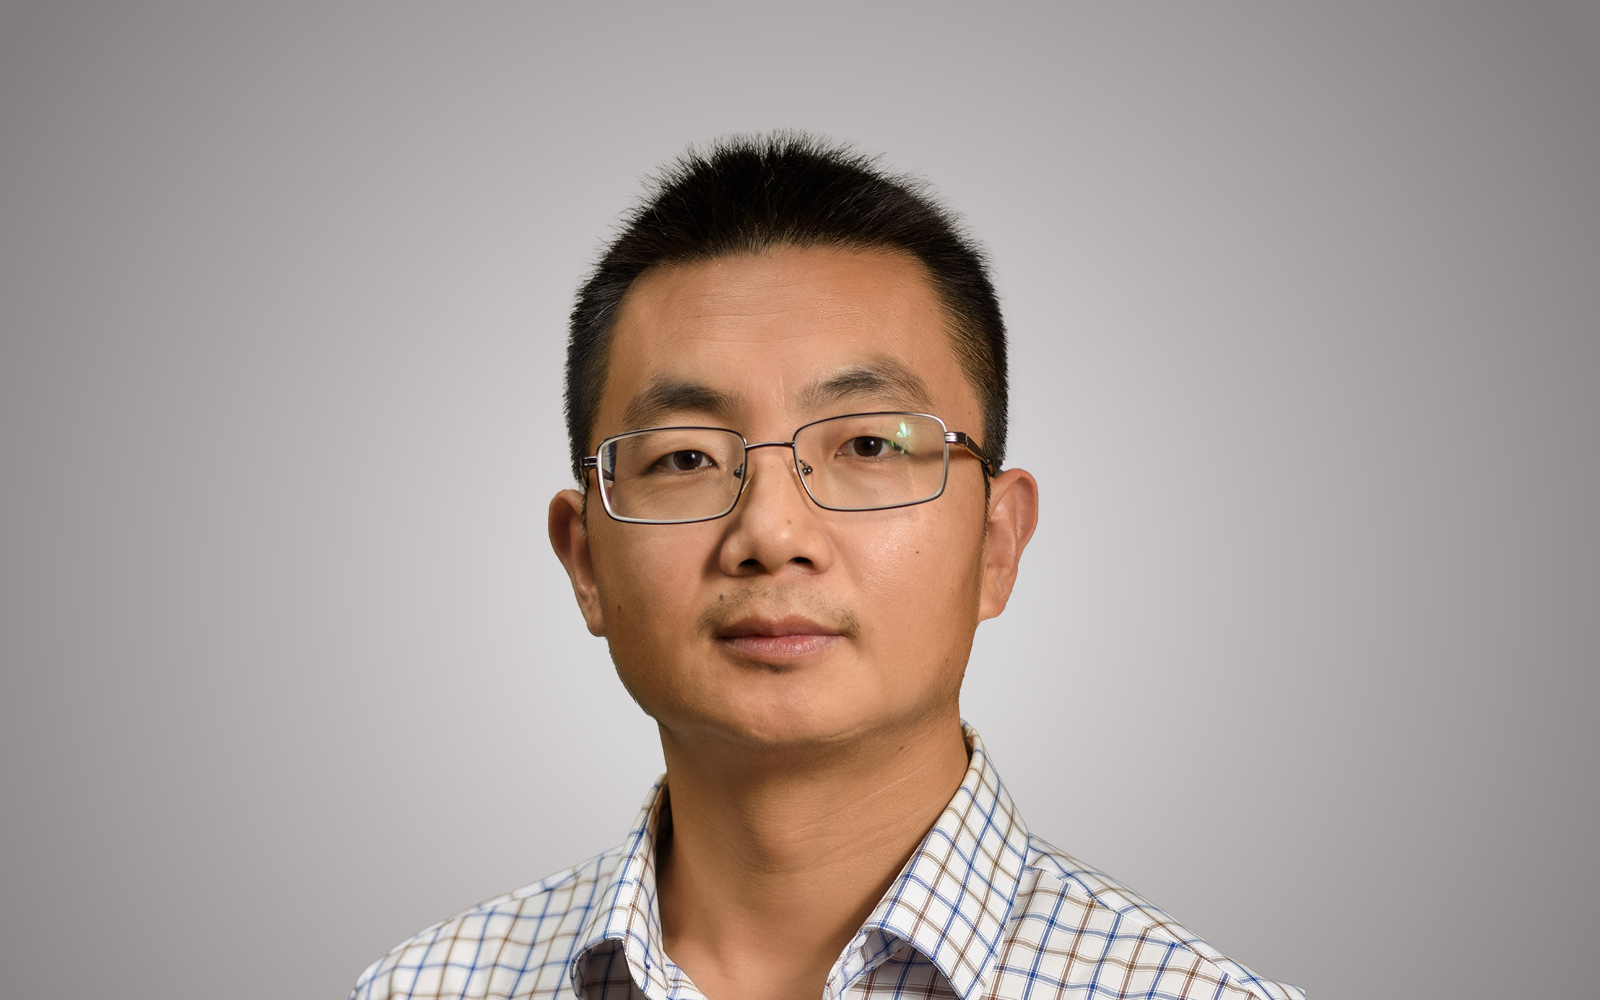 Q&A with Assoc. Prof. Zhanying (Jan) Zhang, FFS Project Leader